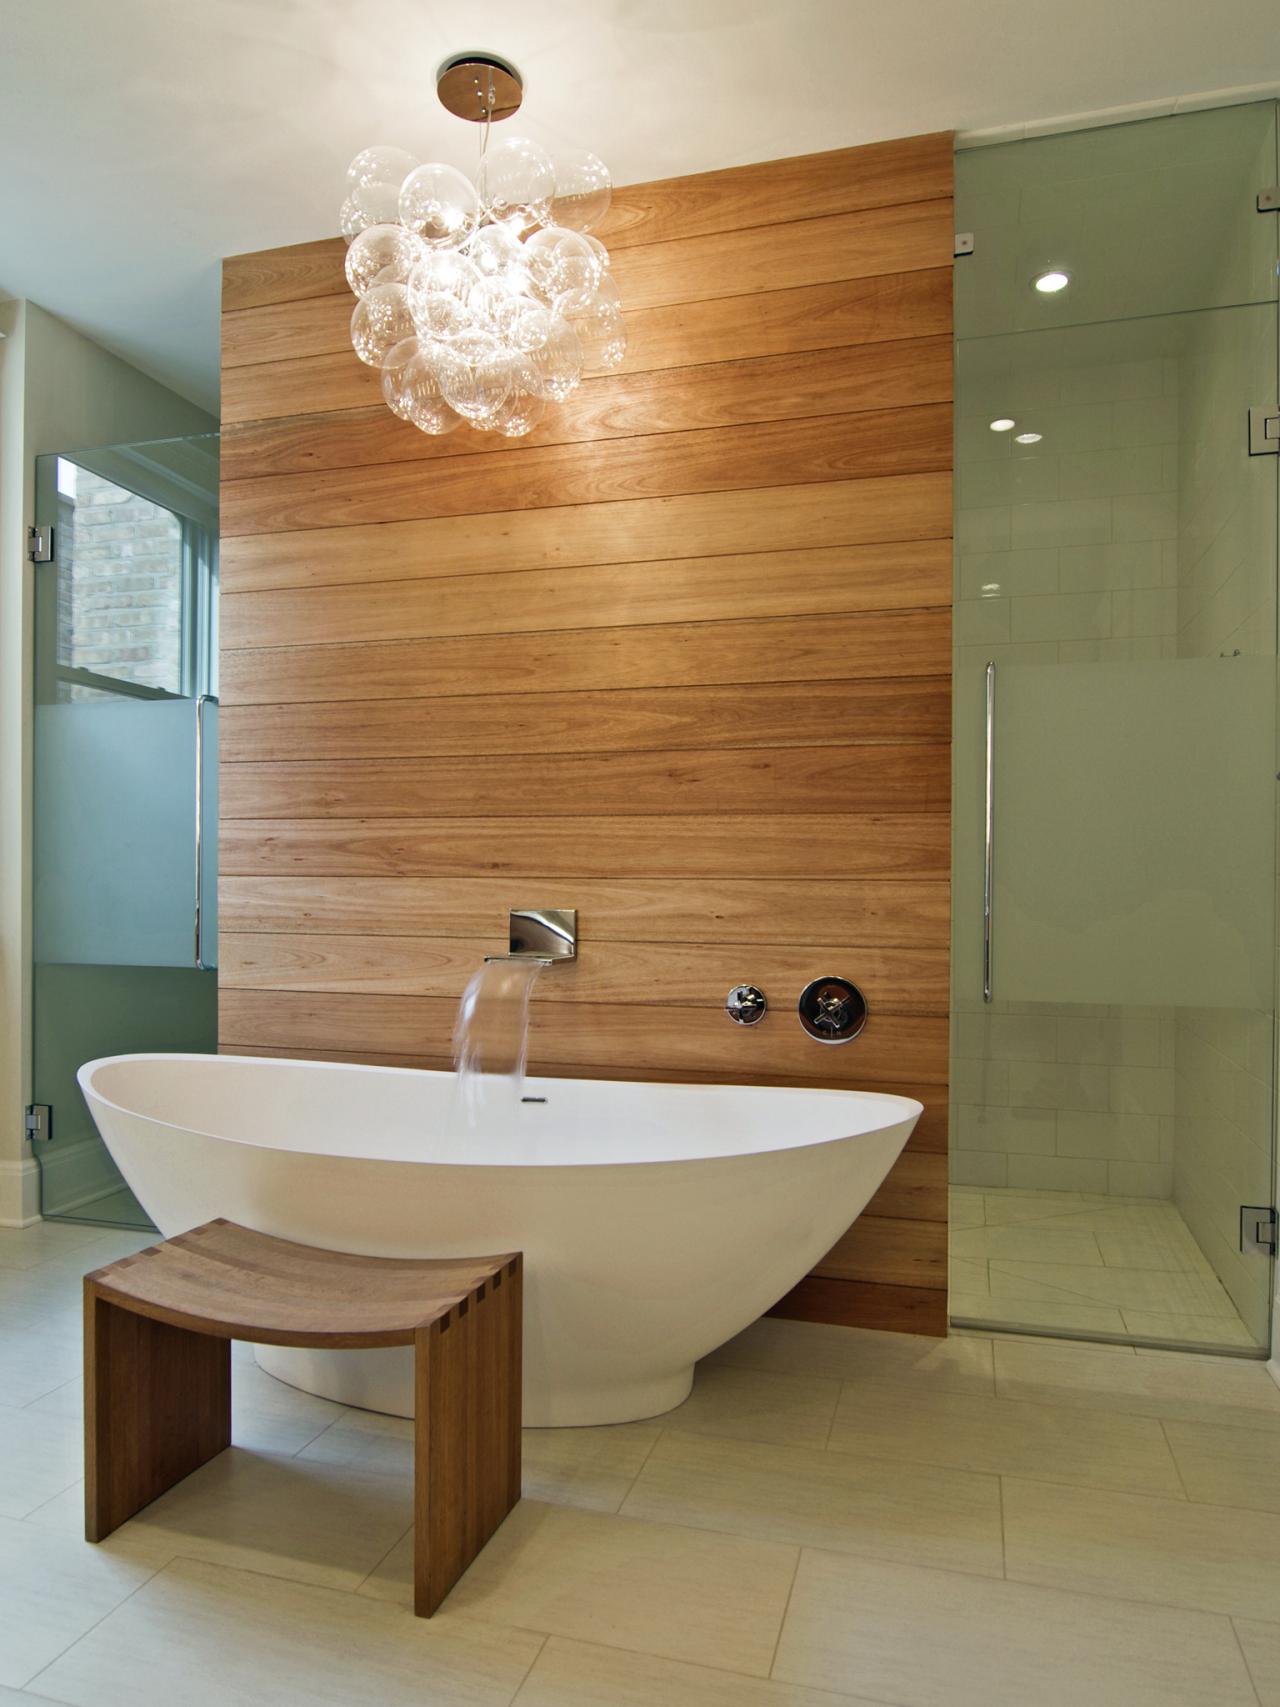 contemporary master bath, the warmth of natural wood balances the stark elegance of the freestanding tub